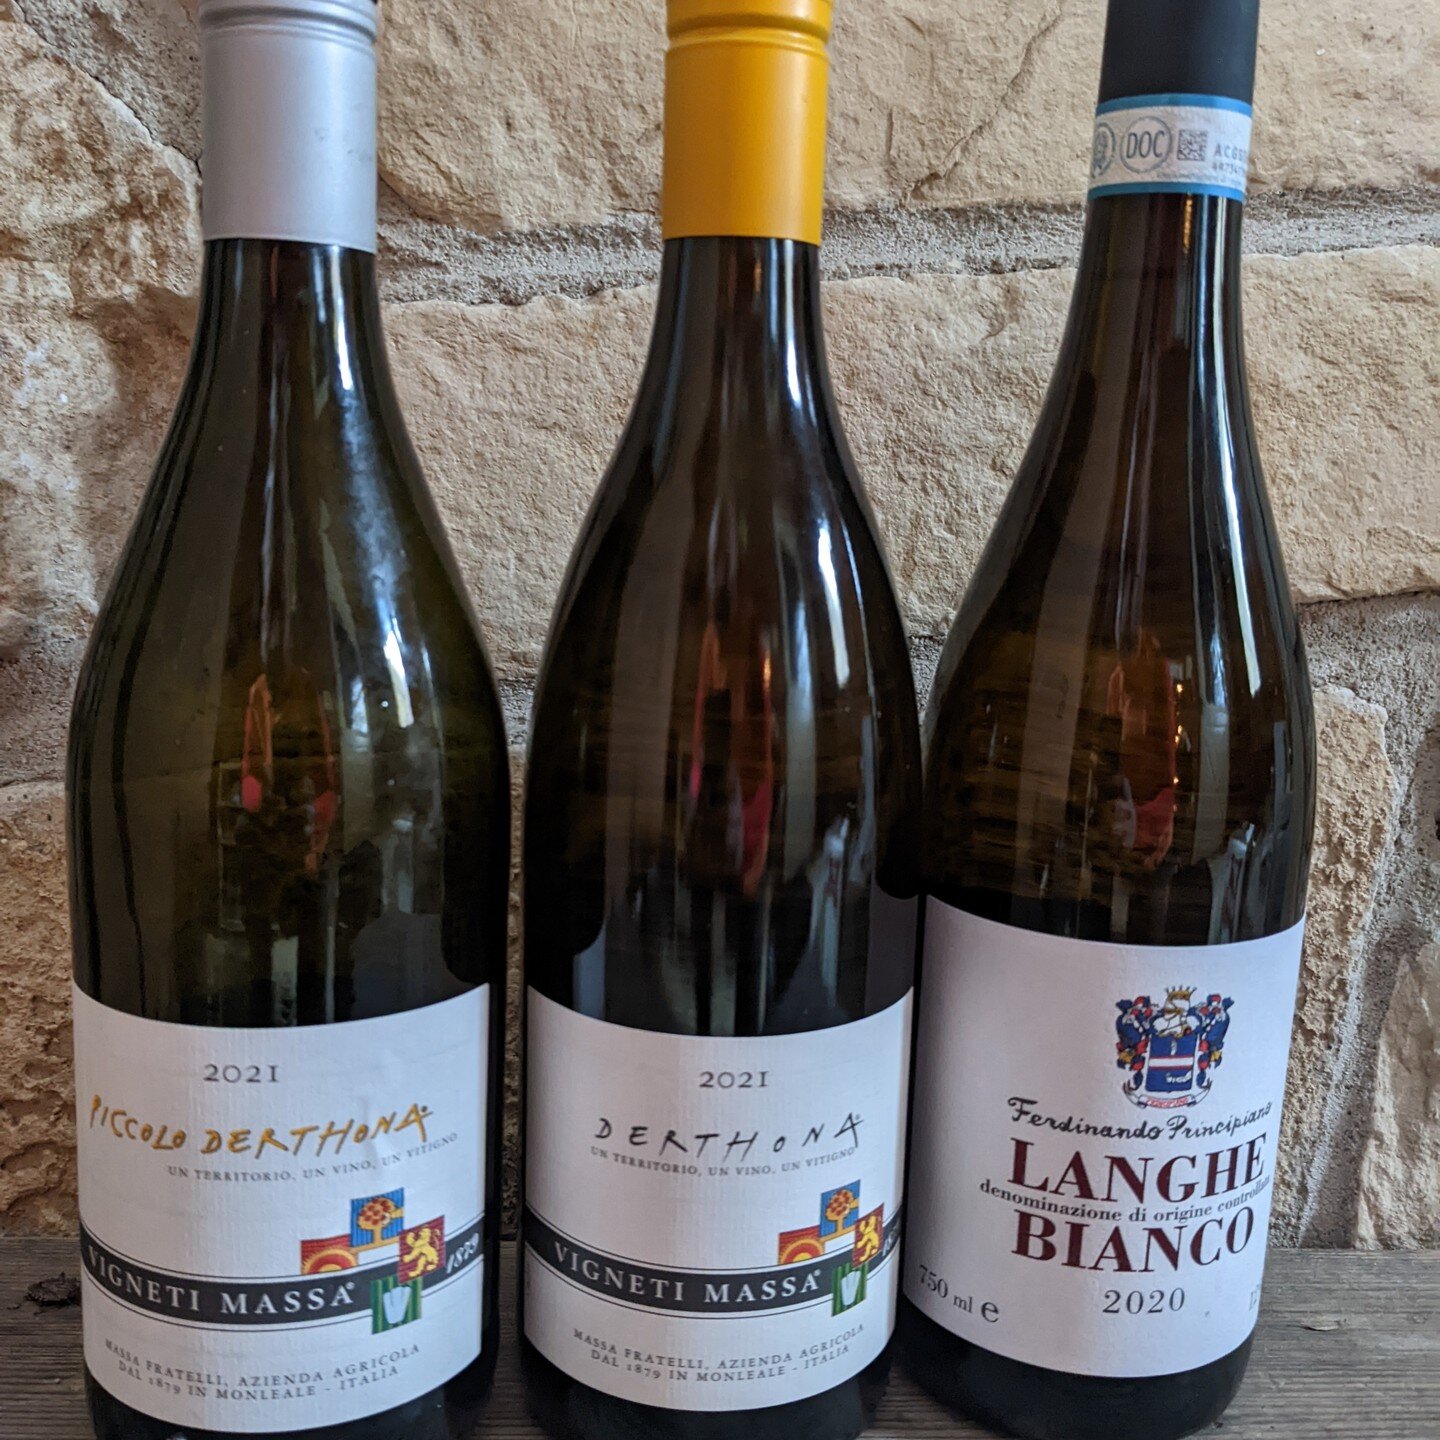 One of the perks of running your own wine distribution company is to be able to bring in exactly the wines you want to bring in. If that means indulging yourself by carrying 3 different all-Timorasso wines, you can do exactly that. Embarrassingly I j